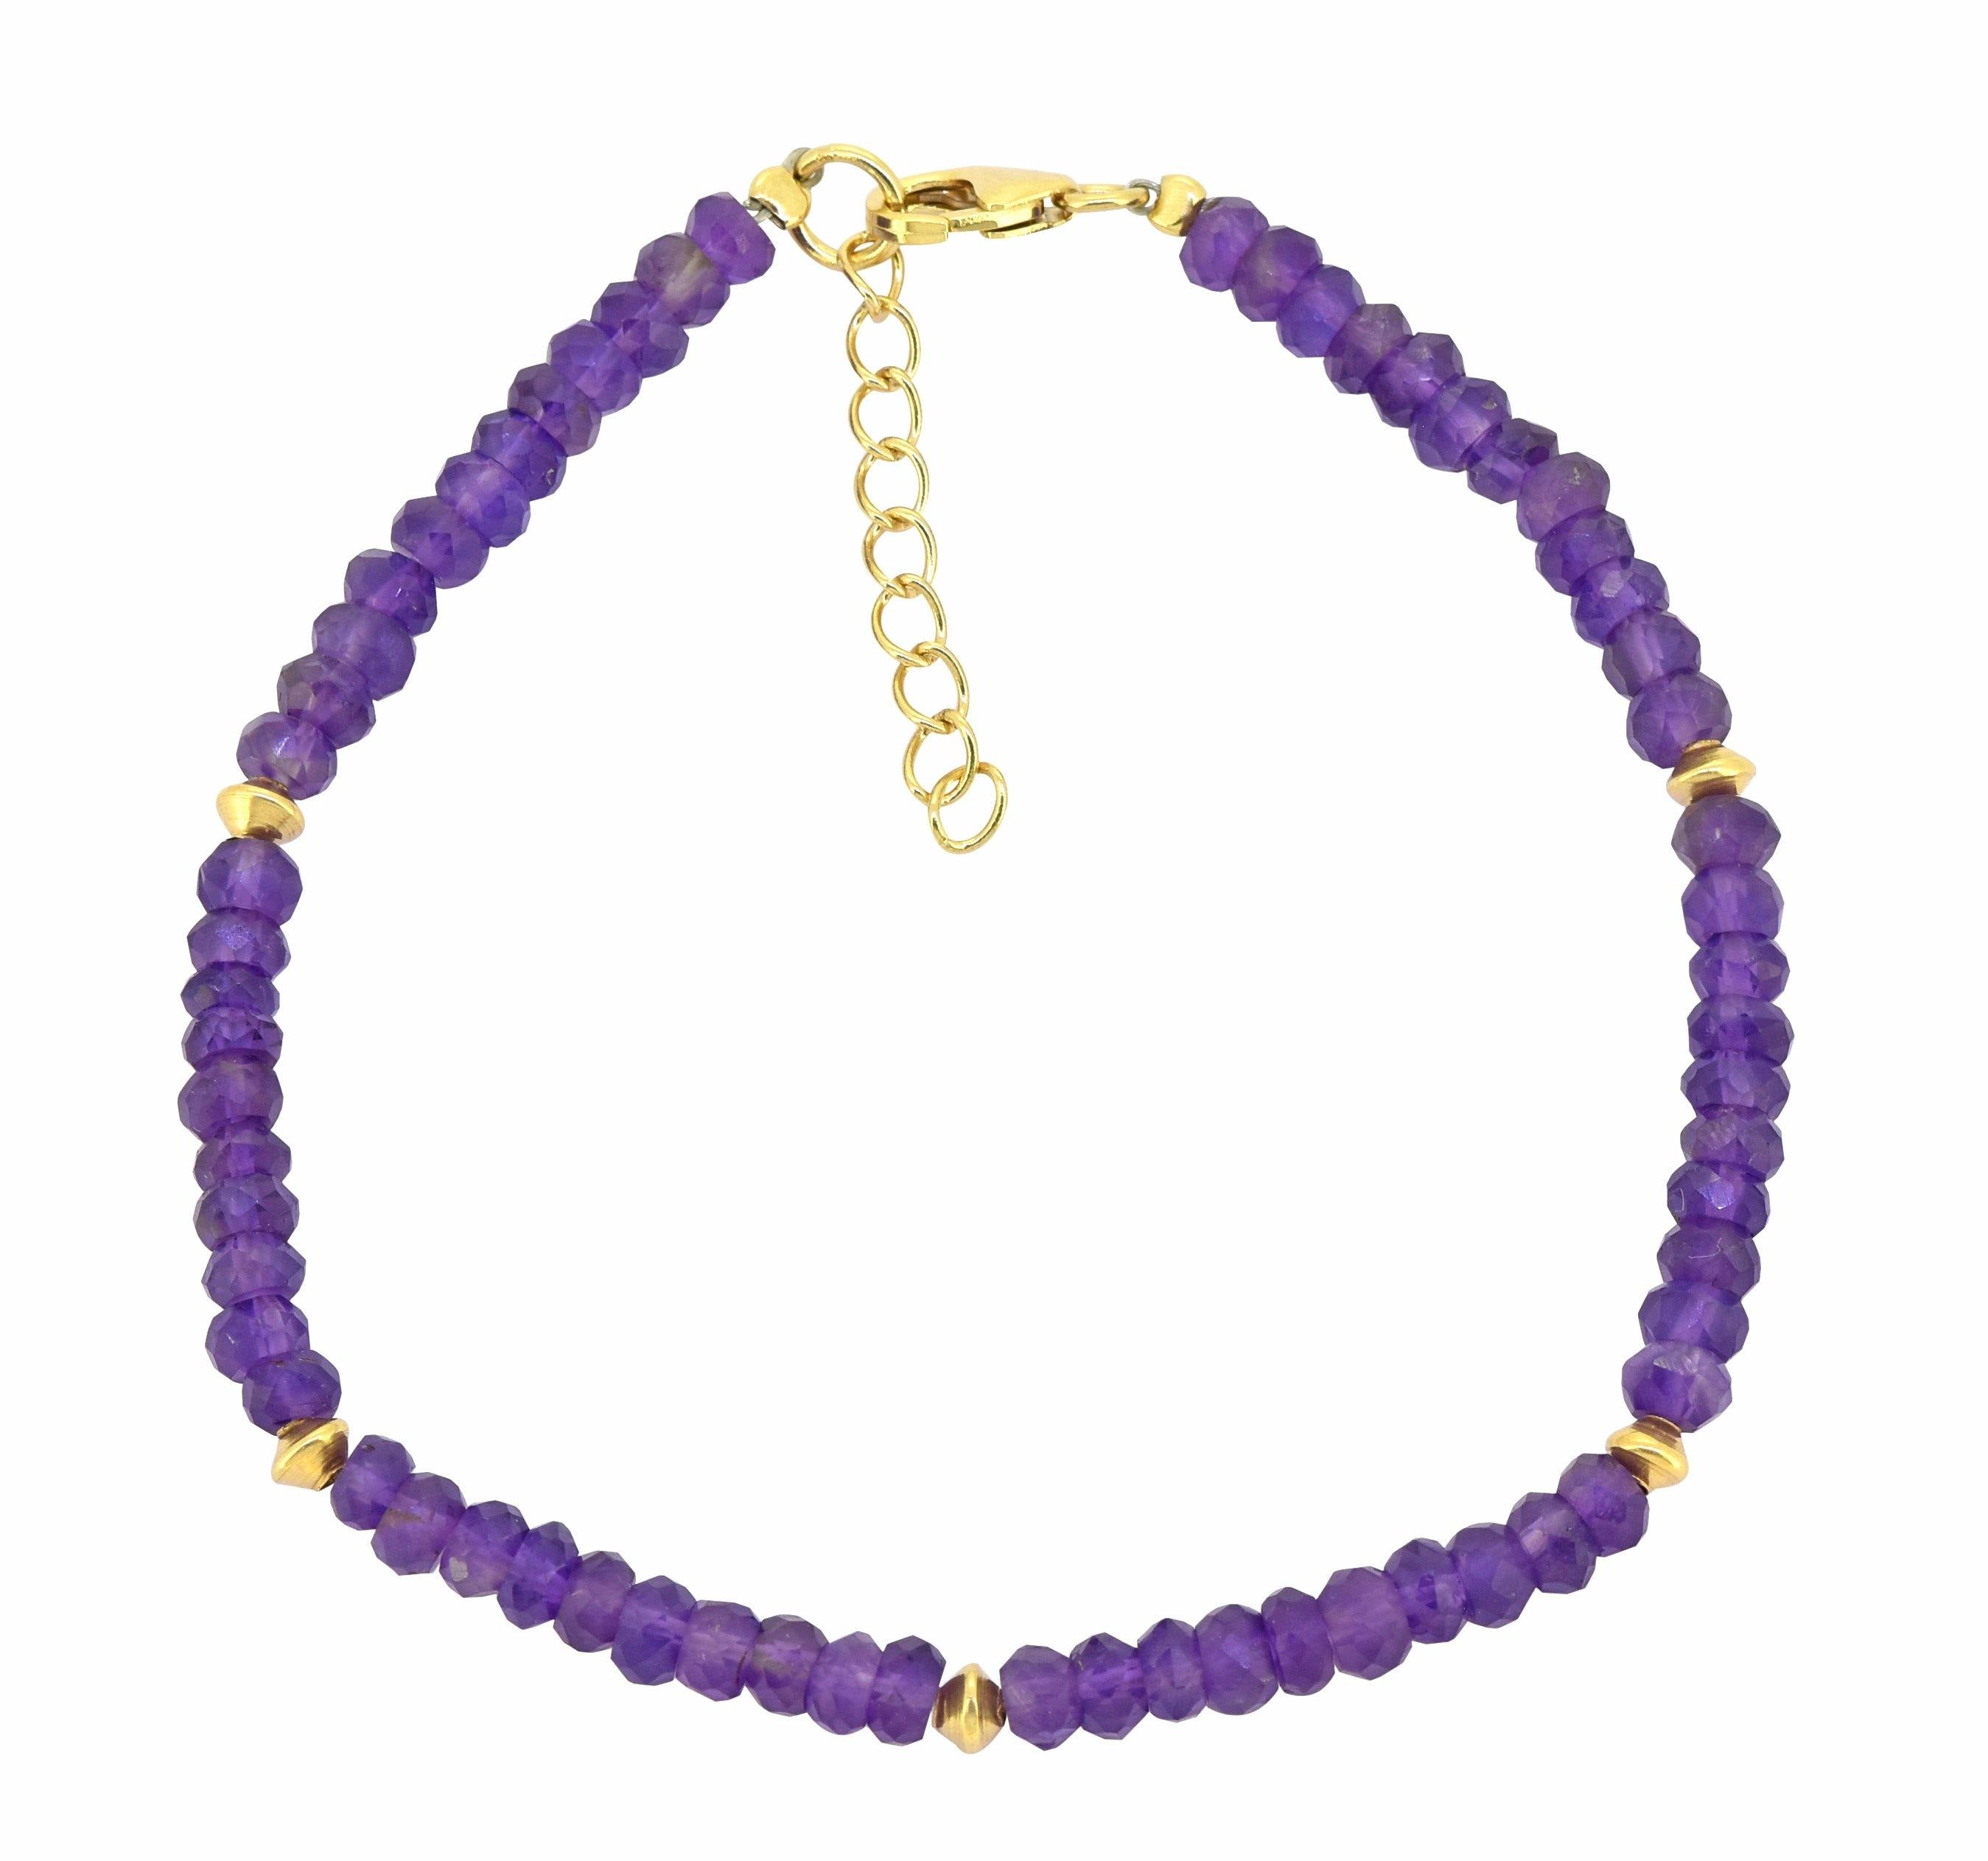 Amethyst Solid 925 Sterling Silver Gold Plated Link Chain Bracelet 8" - YoTreasure